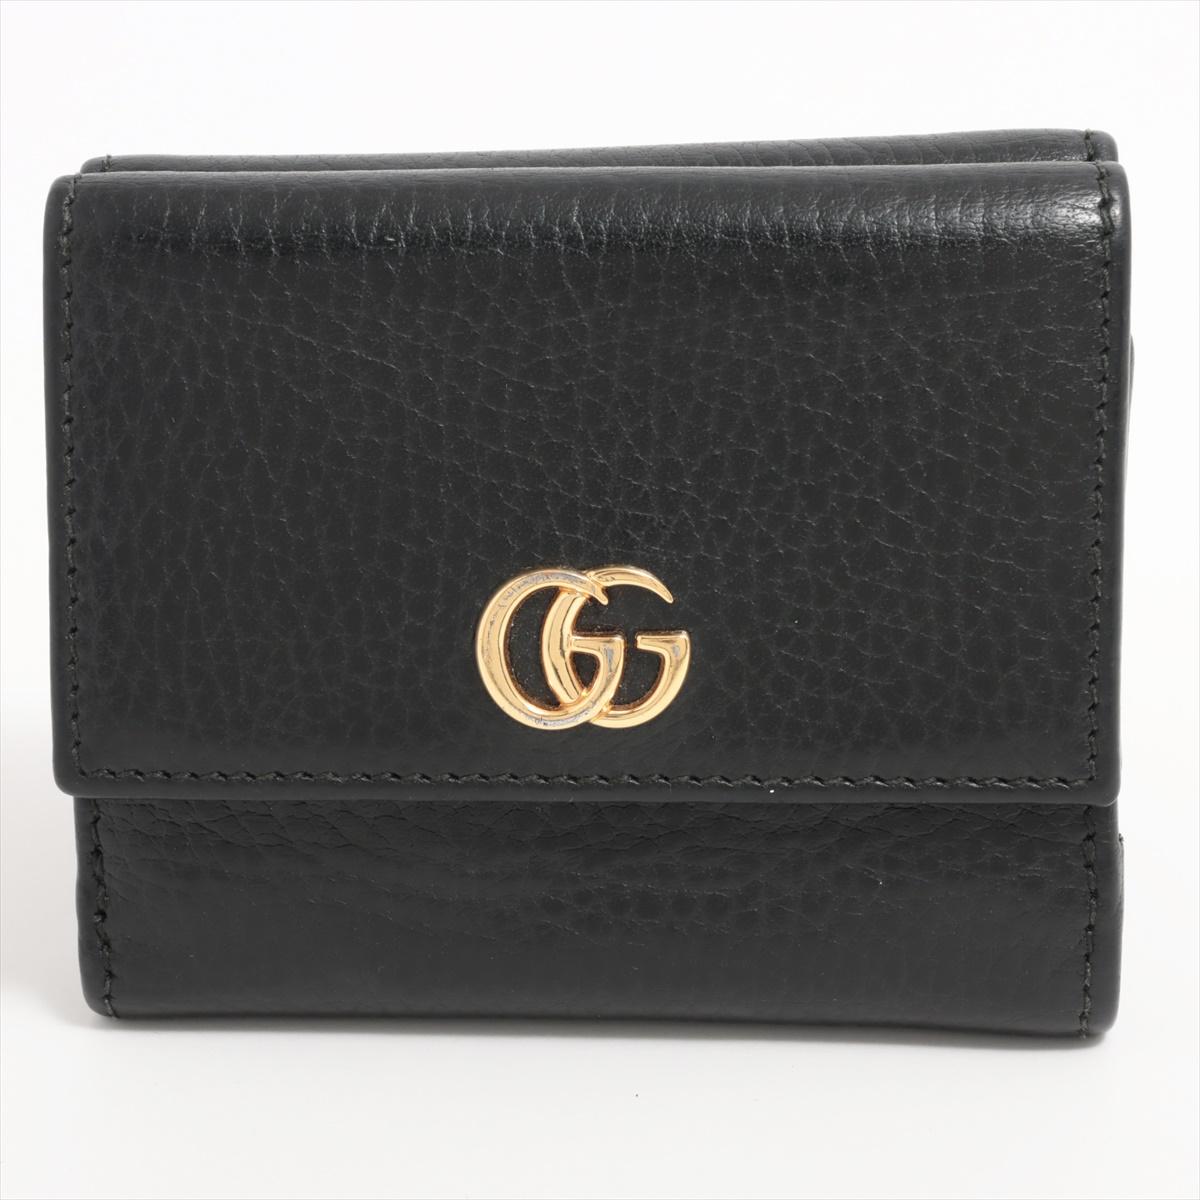 The Gucci GG Marmont Leather Compact Wallet in Black is a chic and practical accessory that seamlessly combines style with functionality. Crafted from high-quality black leather, the wallet features iconic GG logo, reflecting Gucci's signature